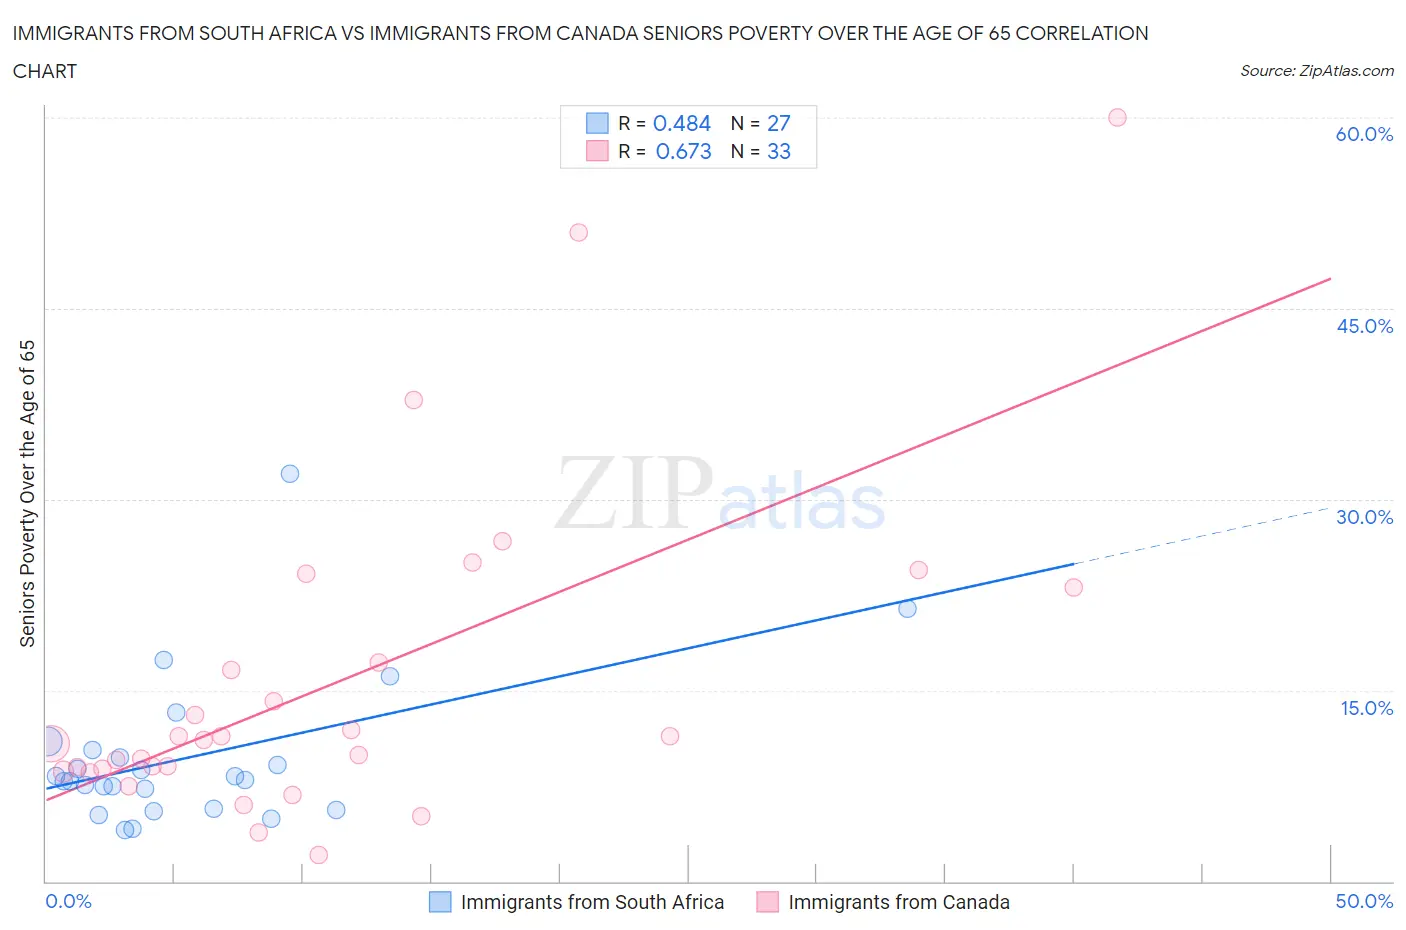 Immigrants from South Africa vs Immigrants from Canada Seniors Poverty Over the Age of 65